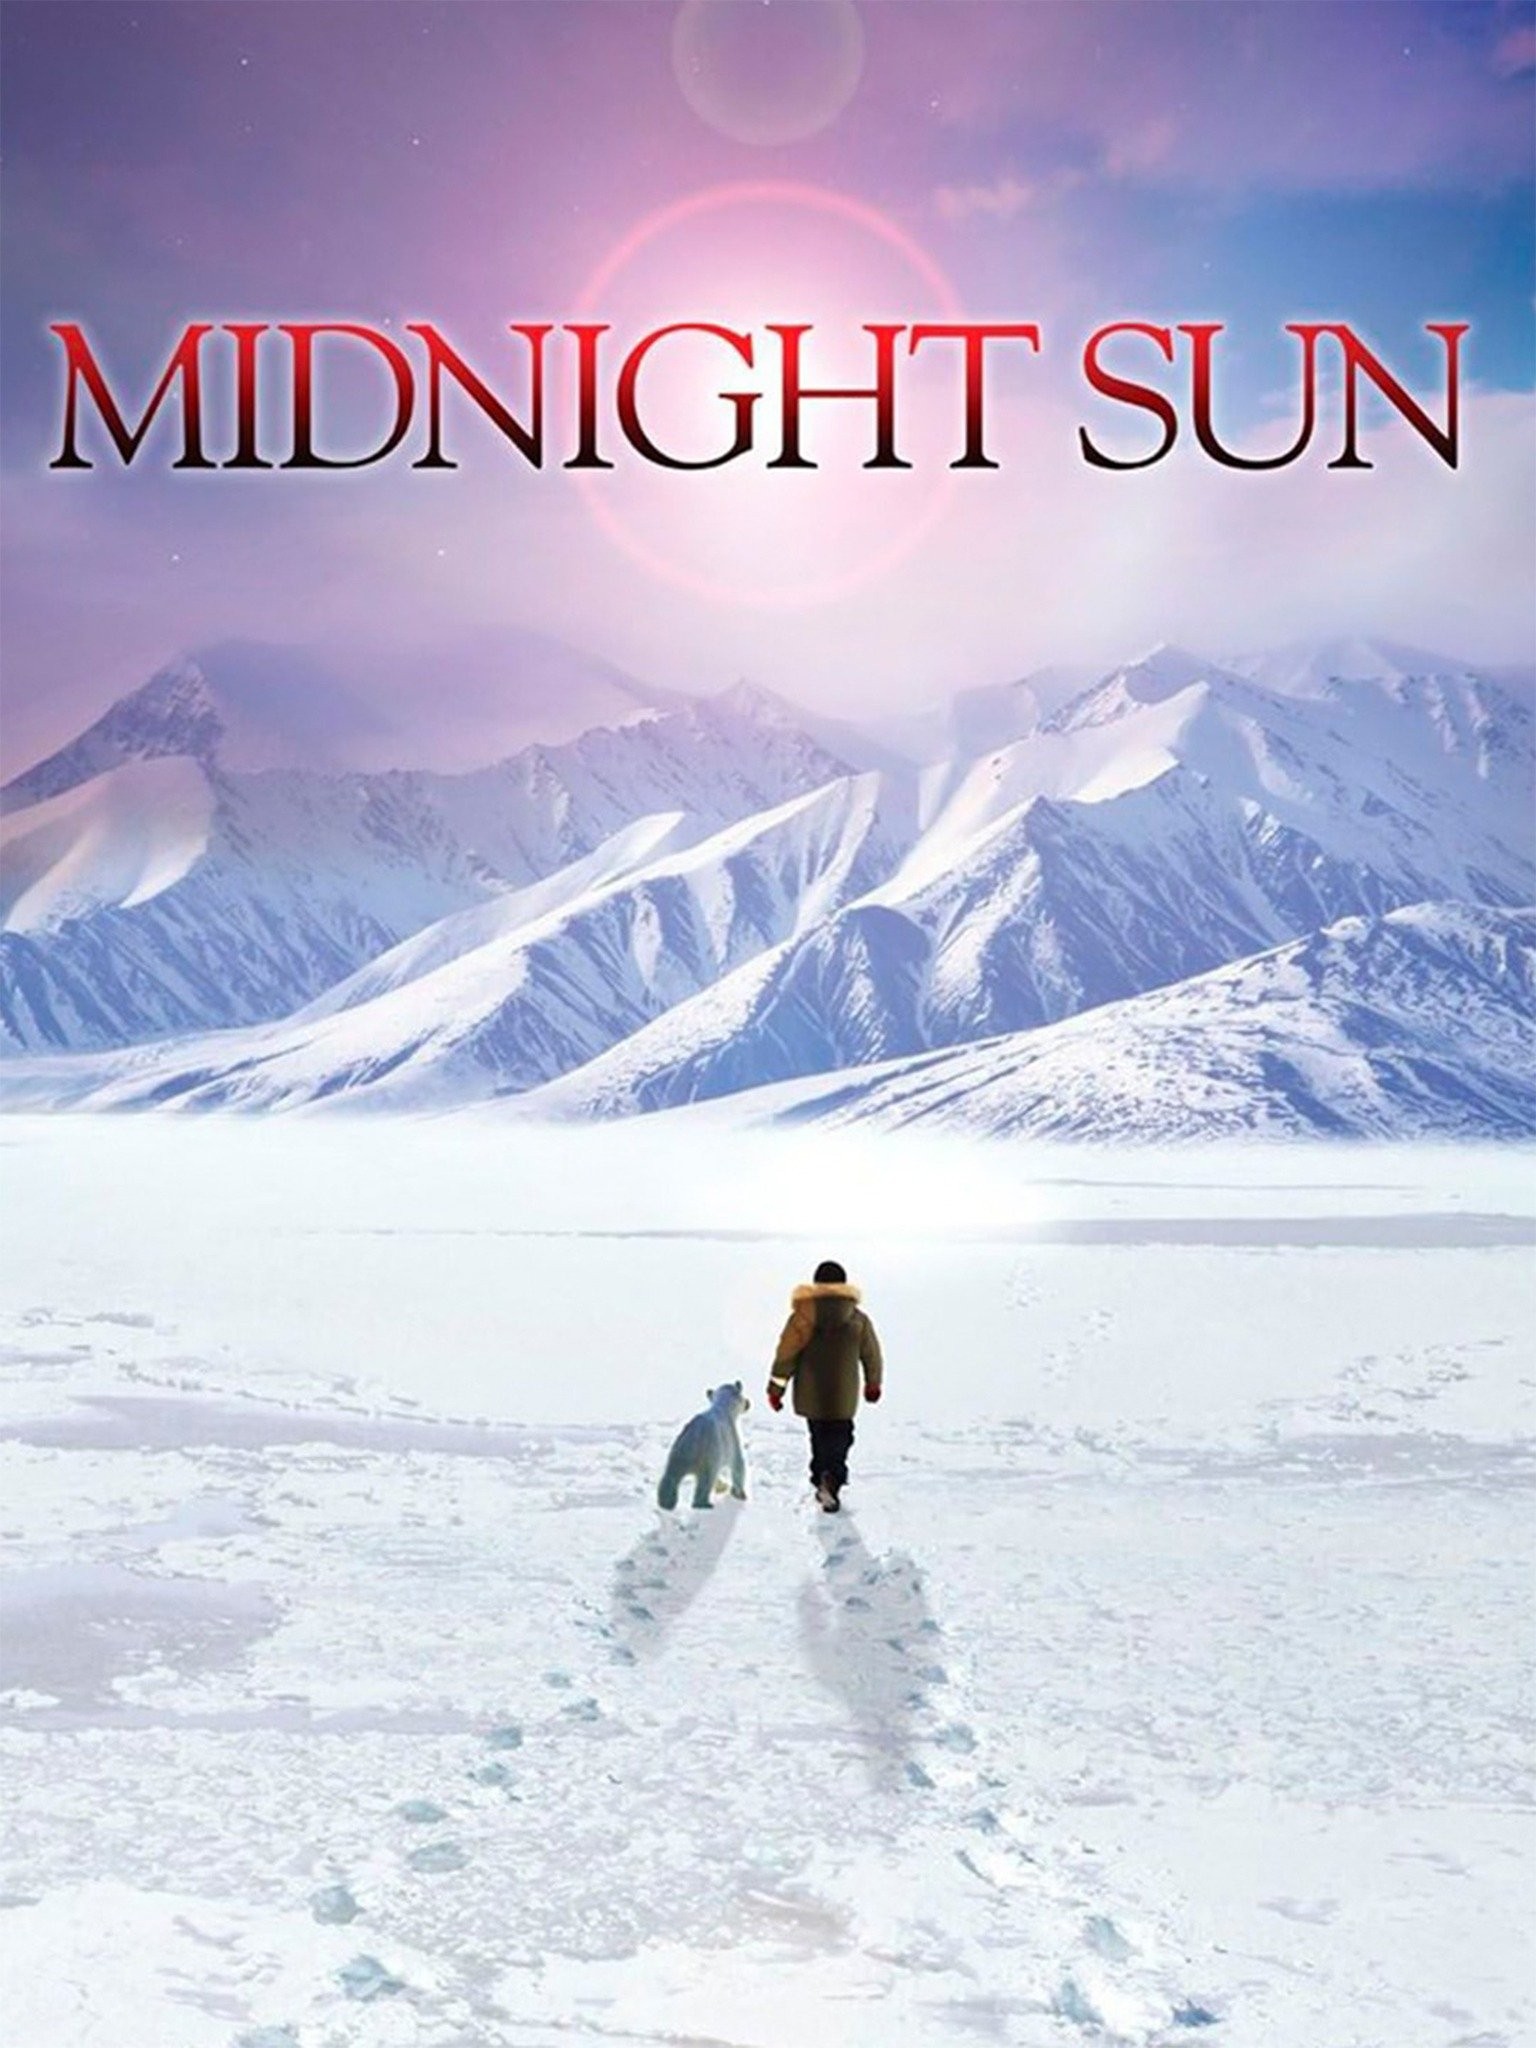 Where to watch Midnight Sun TV series streaming online?